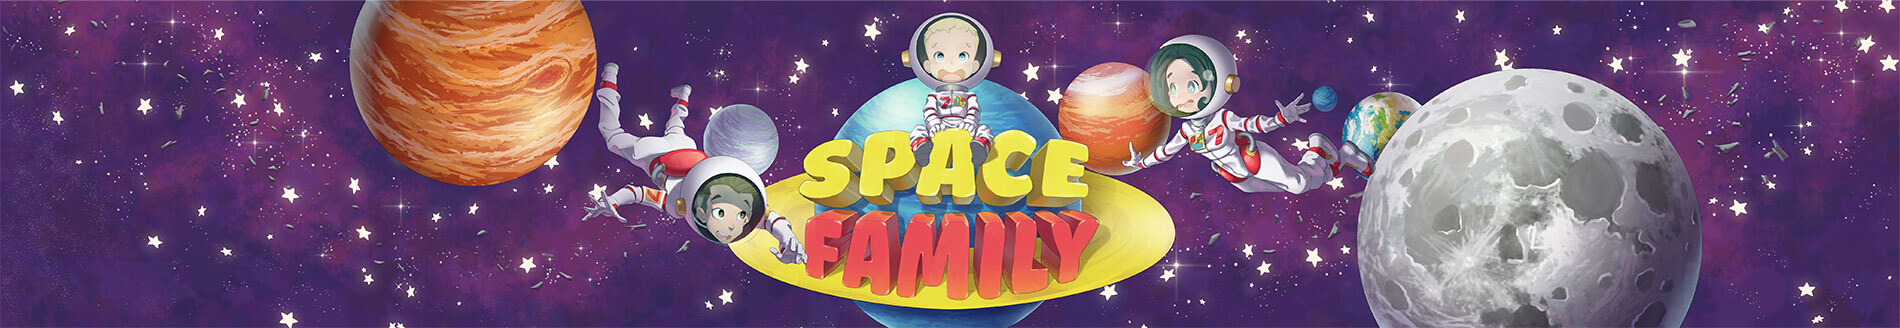 804073 space family